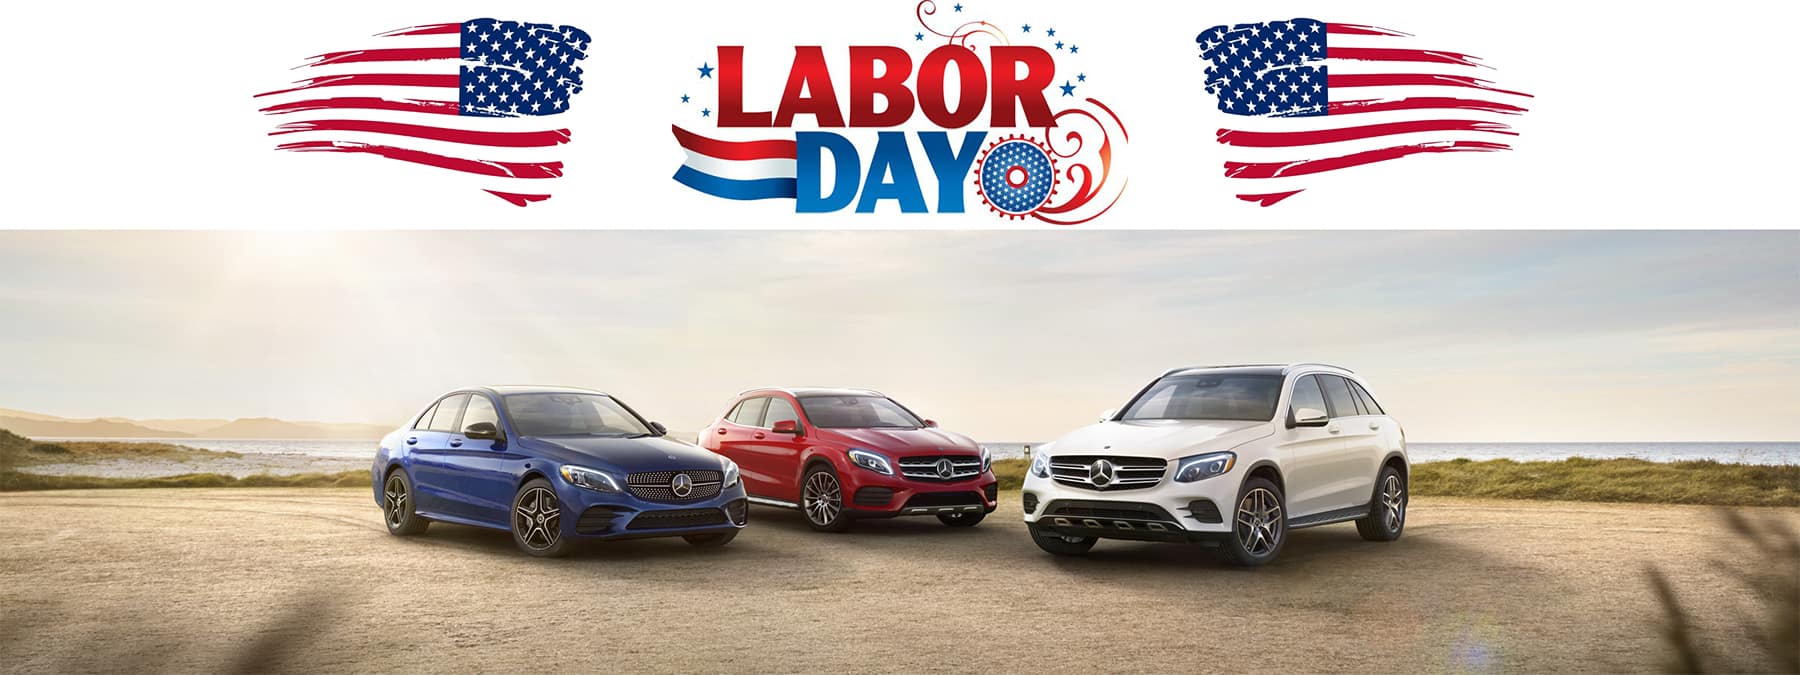 Are Car Dealerships Open on Labor Day